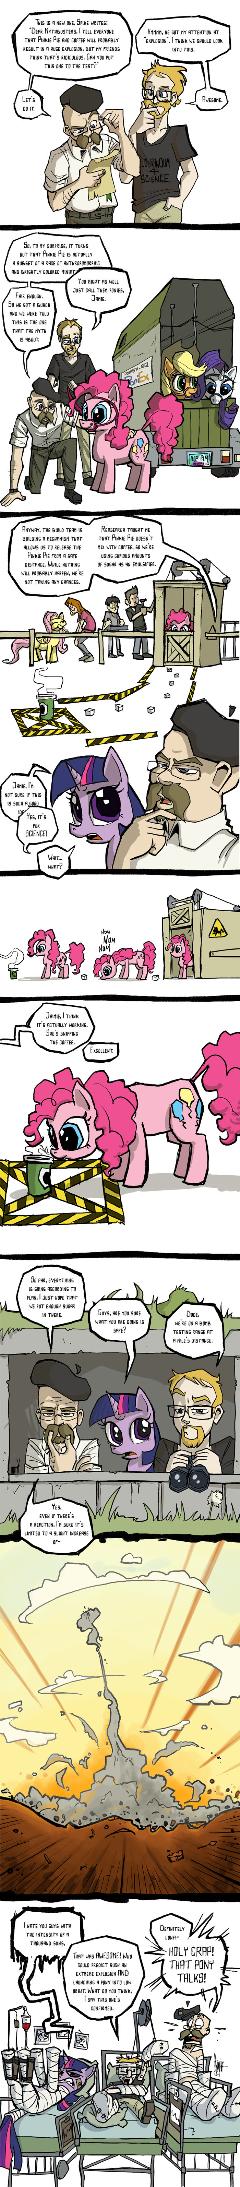 Today on Mythbusters: ponies